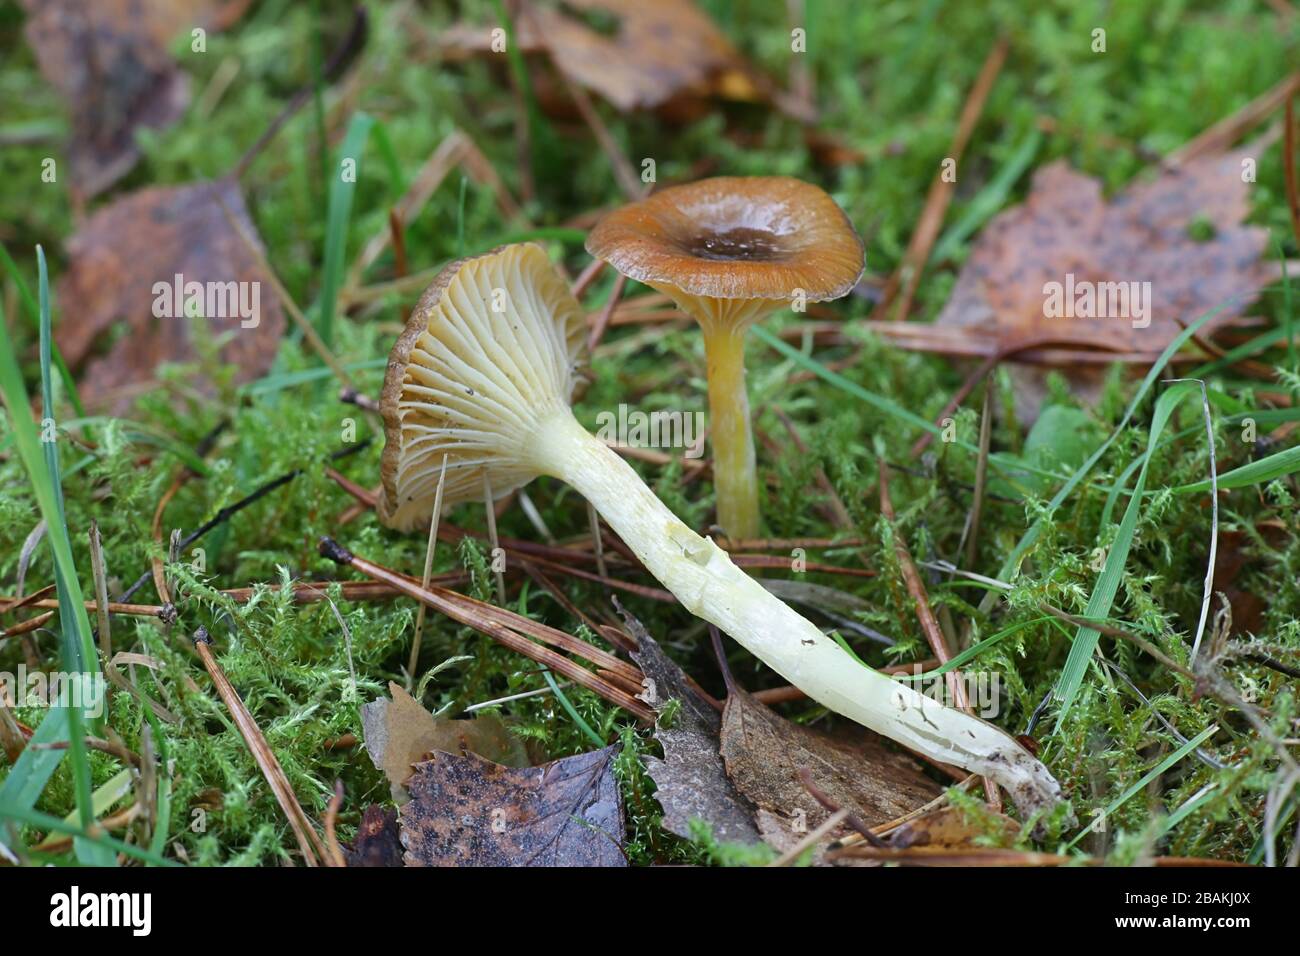 Hygrophorus hypothejus, known as herald of the winter,  late fall waxy cap or yellow-gilled waxcap, edible mushrooms from Finland Stock Photo